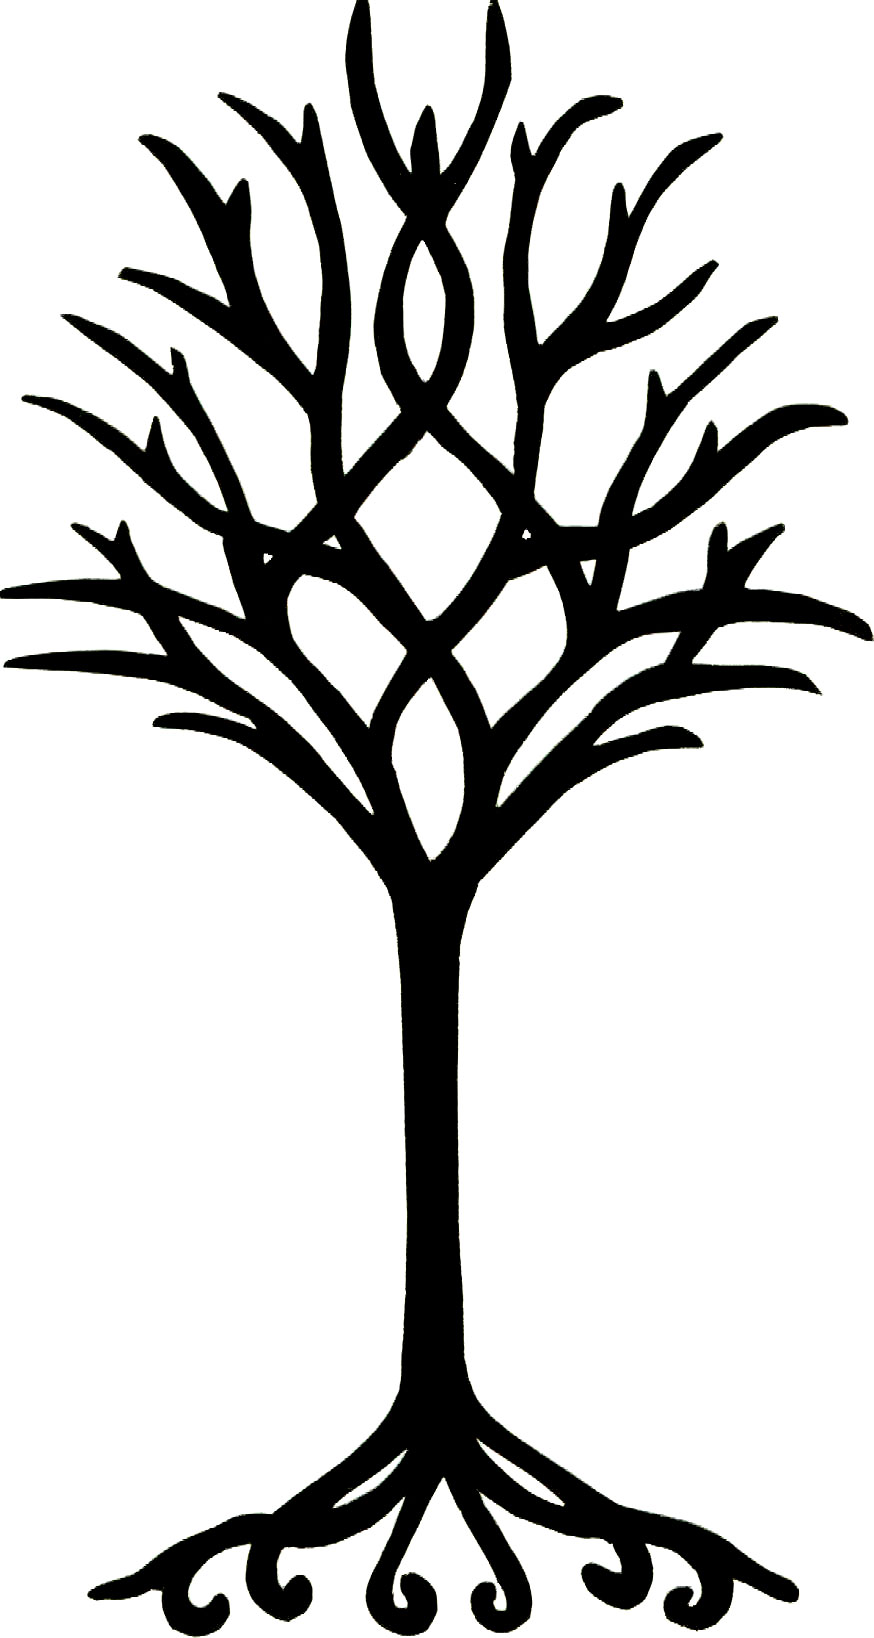 Tree Line Drawing - ClipArt Best